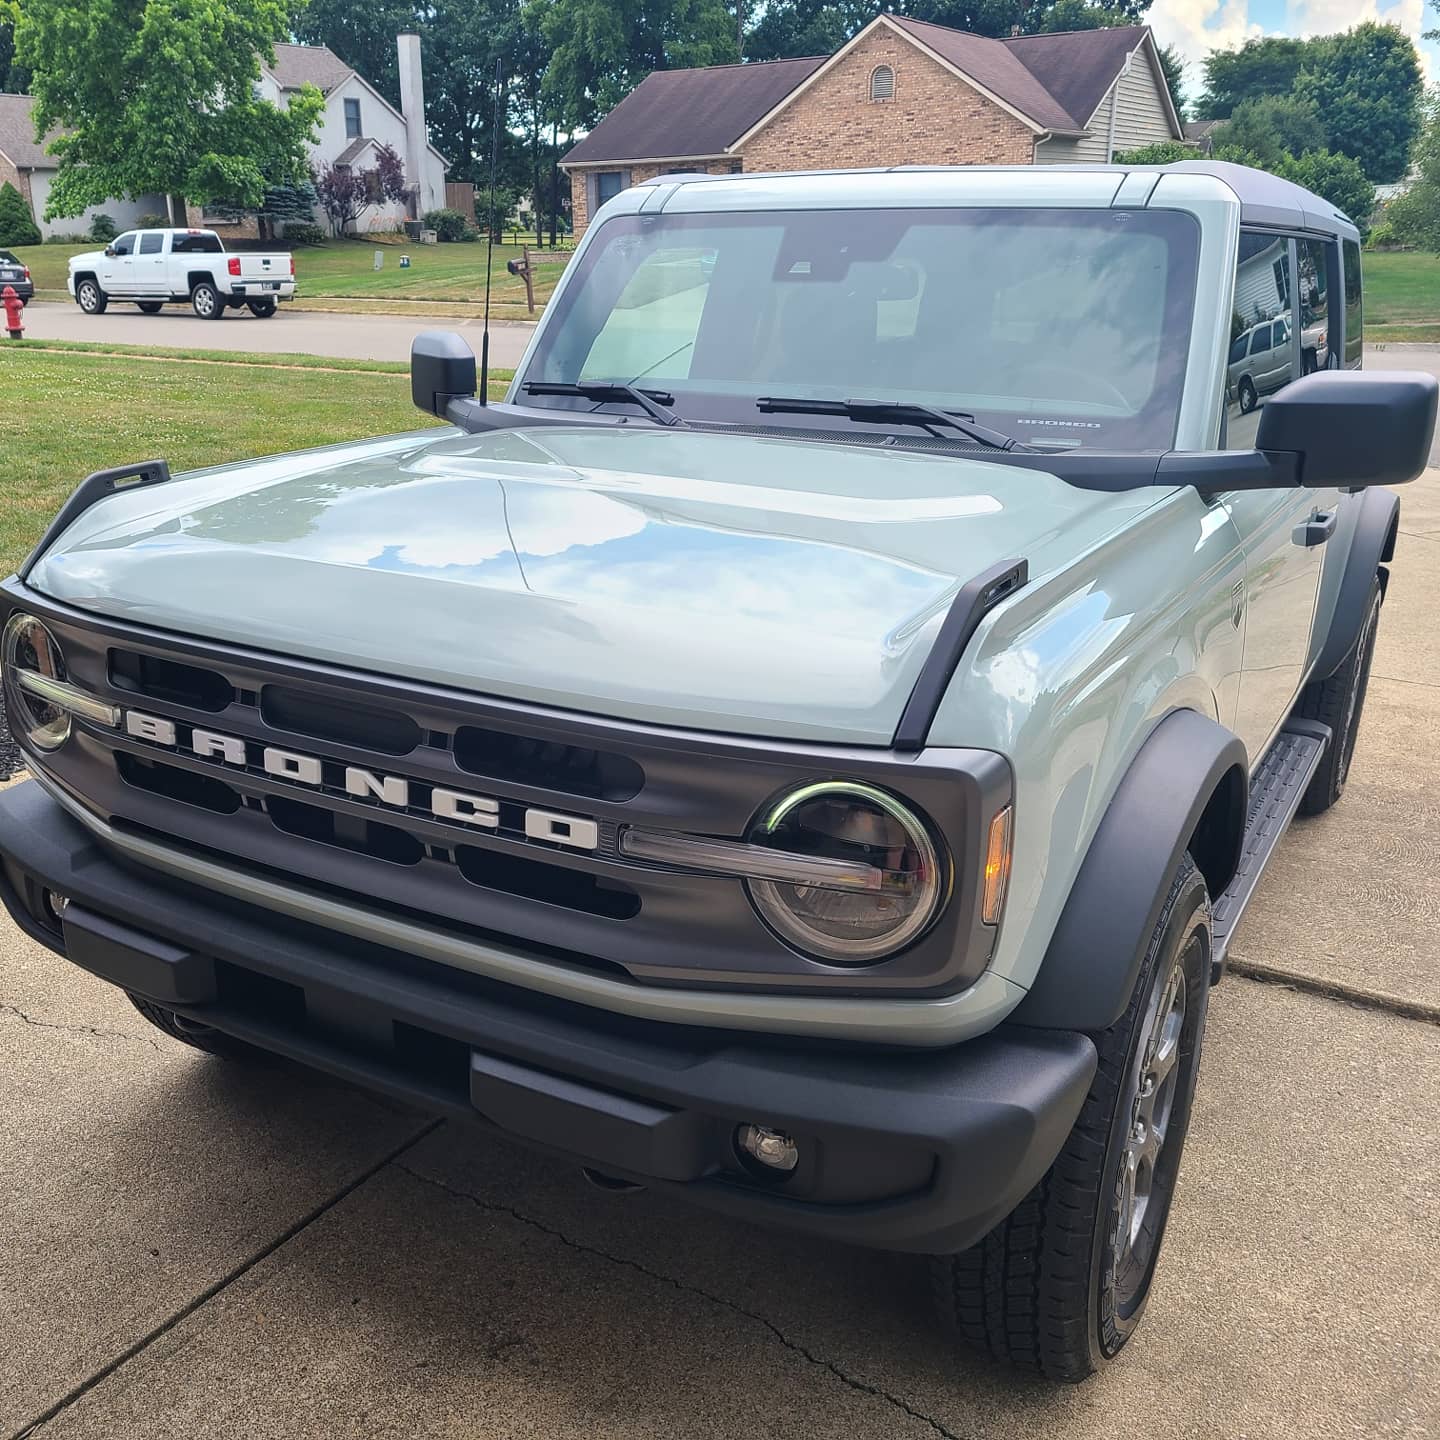 Ford Bronco My Cactus Gray Big Bend just delivered. First pics & early impressions img_20210629_173501_491-